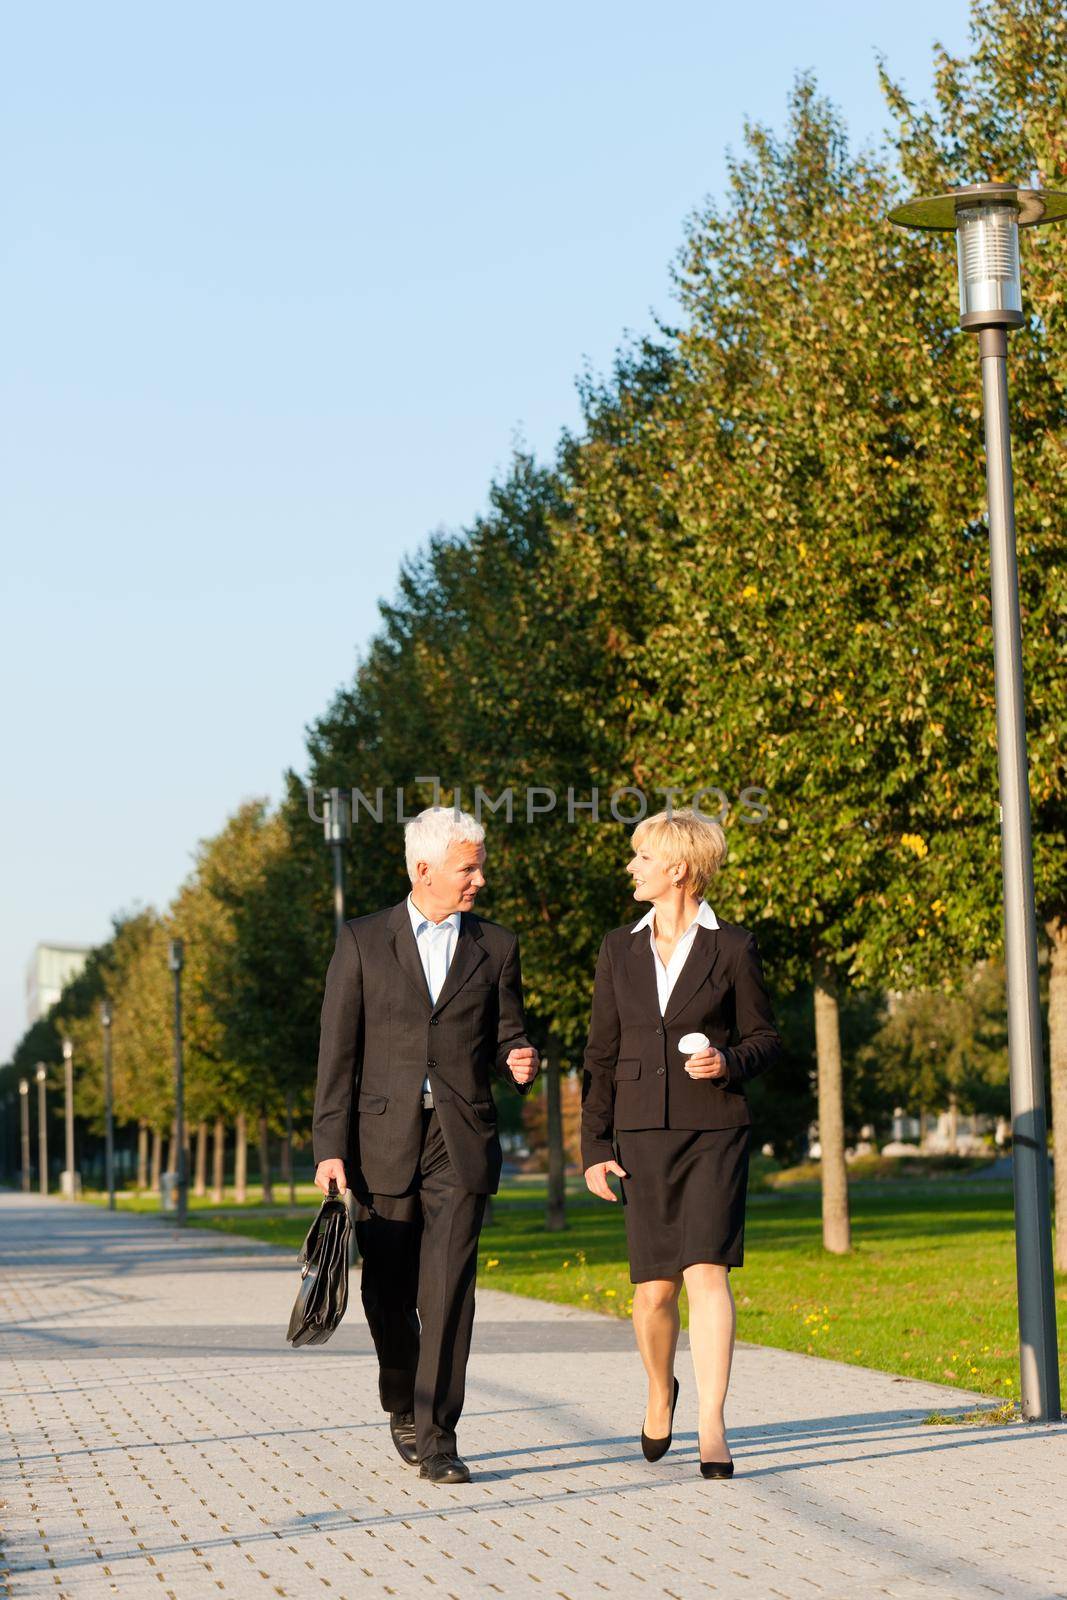 Business people - mature or senior - talking outdoors and walking in a park